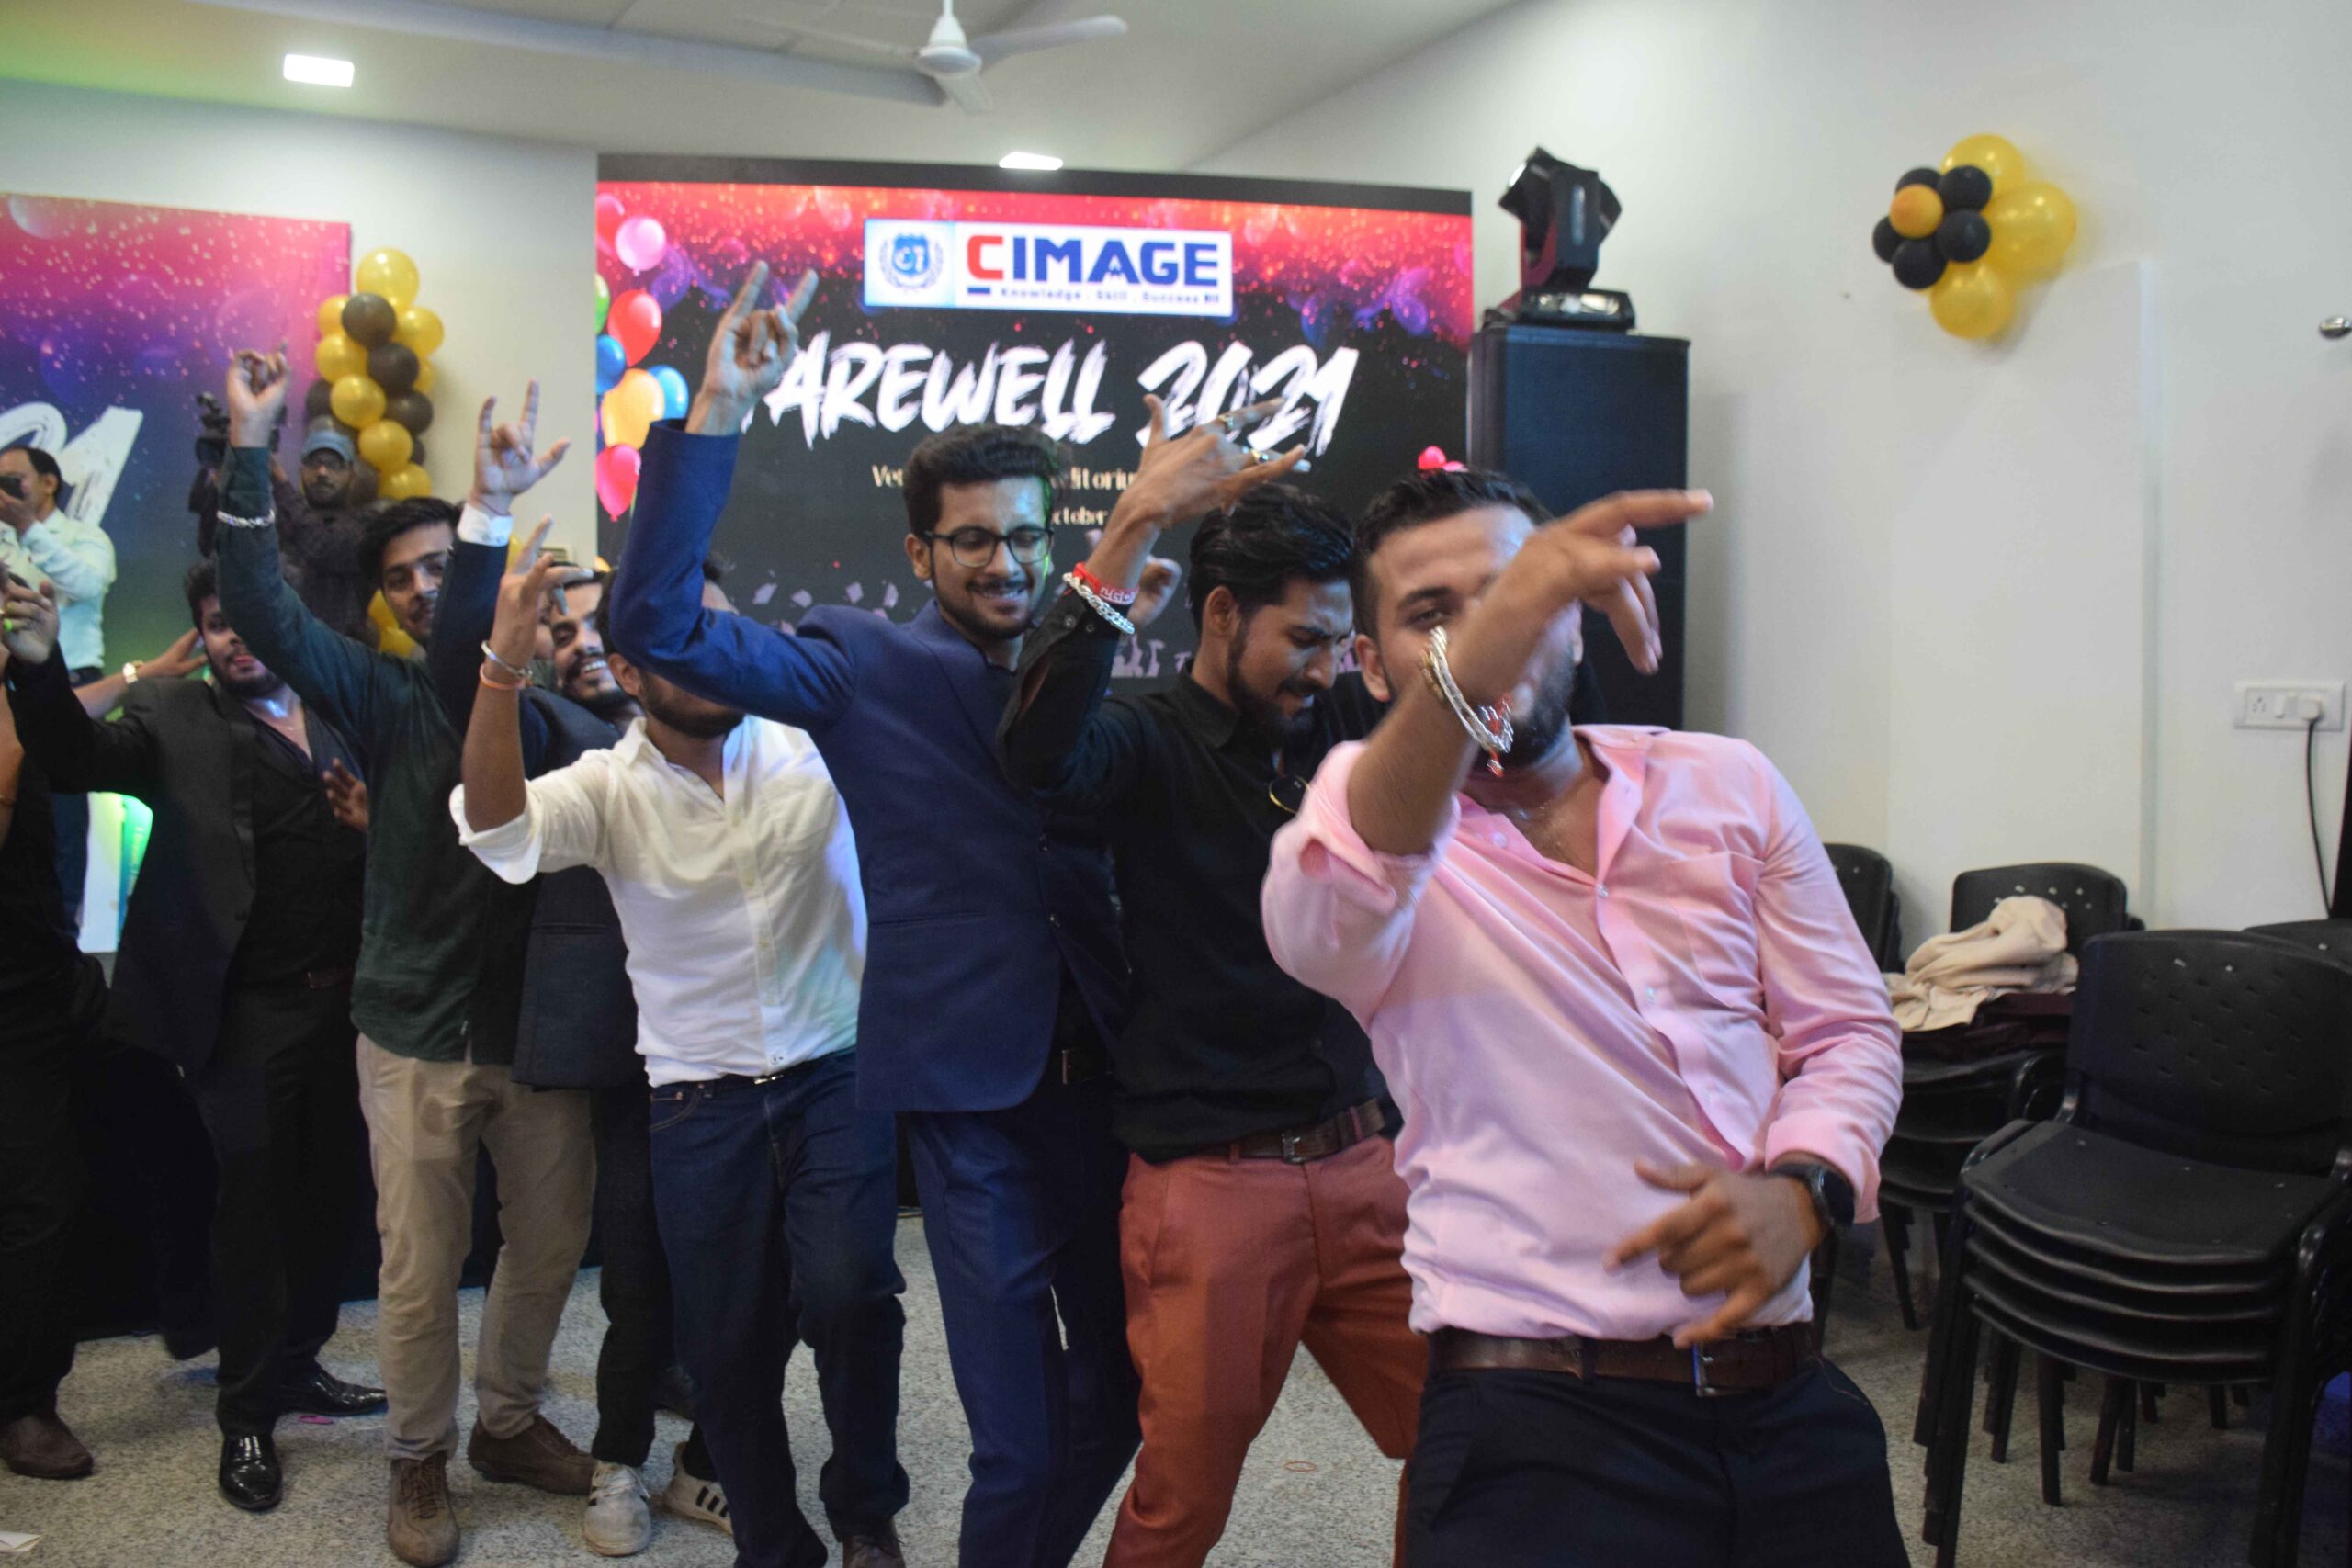 CIMAGE Farewell Party